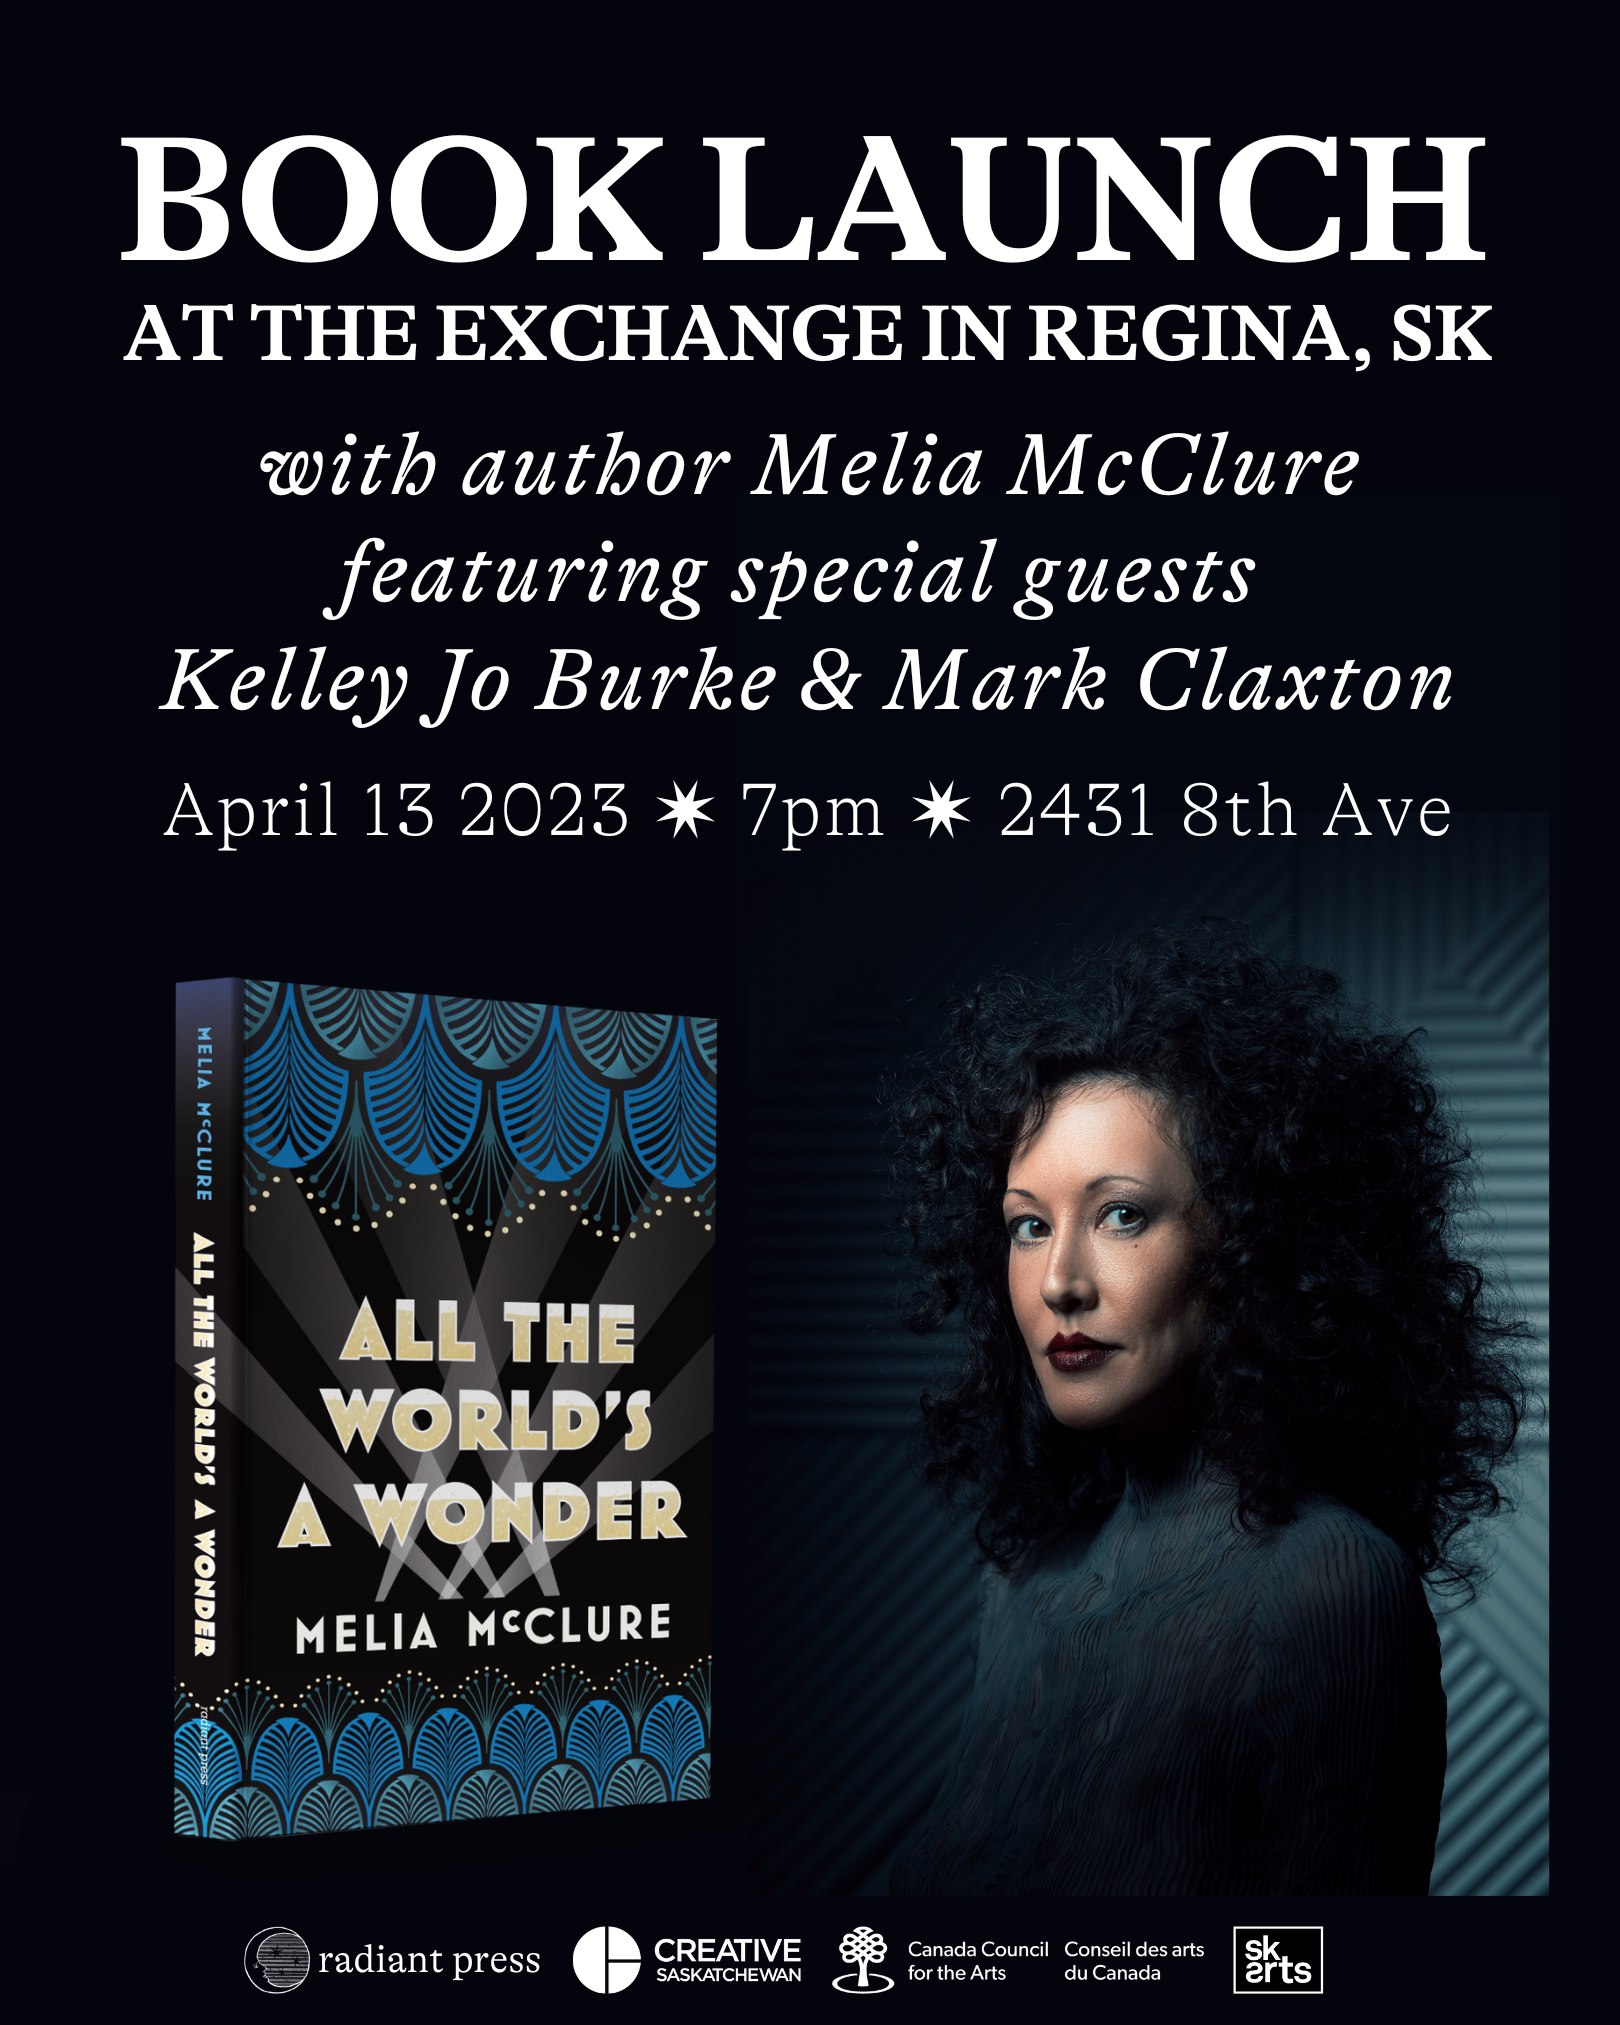 All the World's a Wonder - book launch 